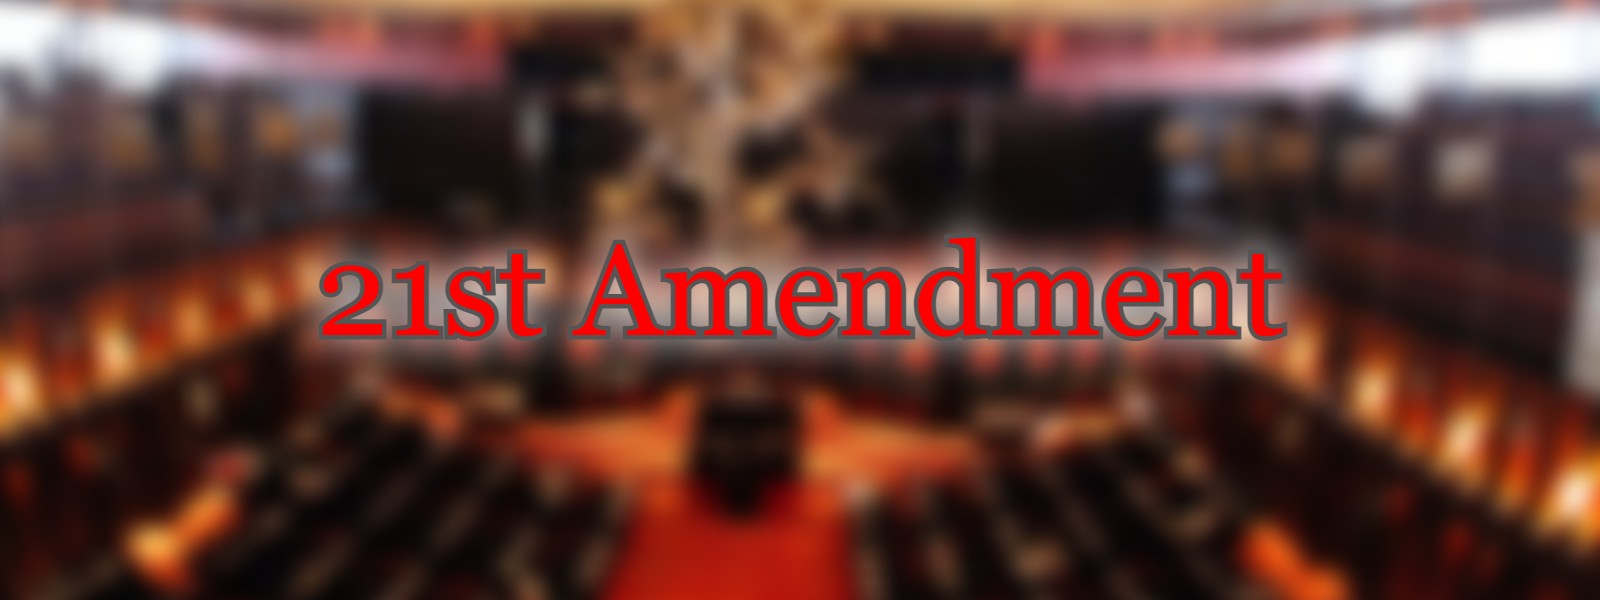 Major parties weigh in on 21st Amendment